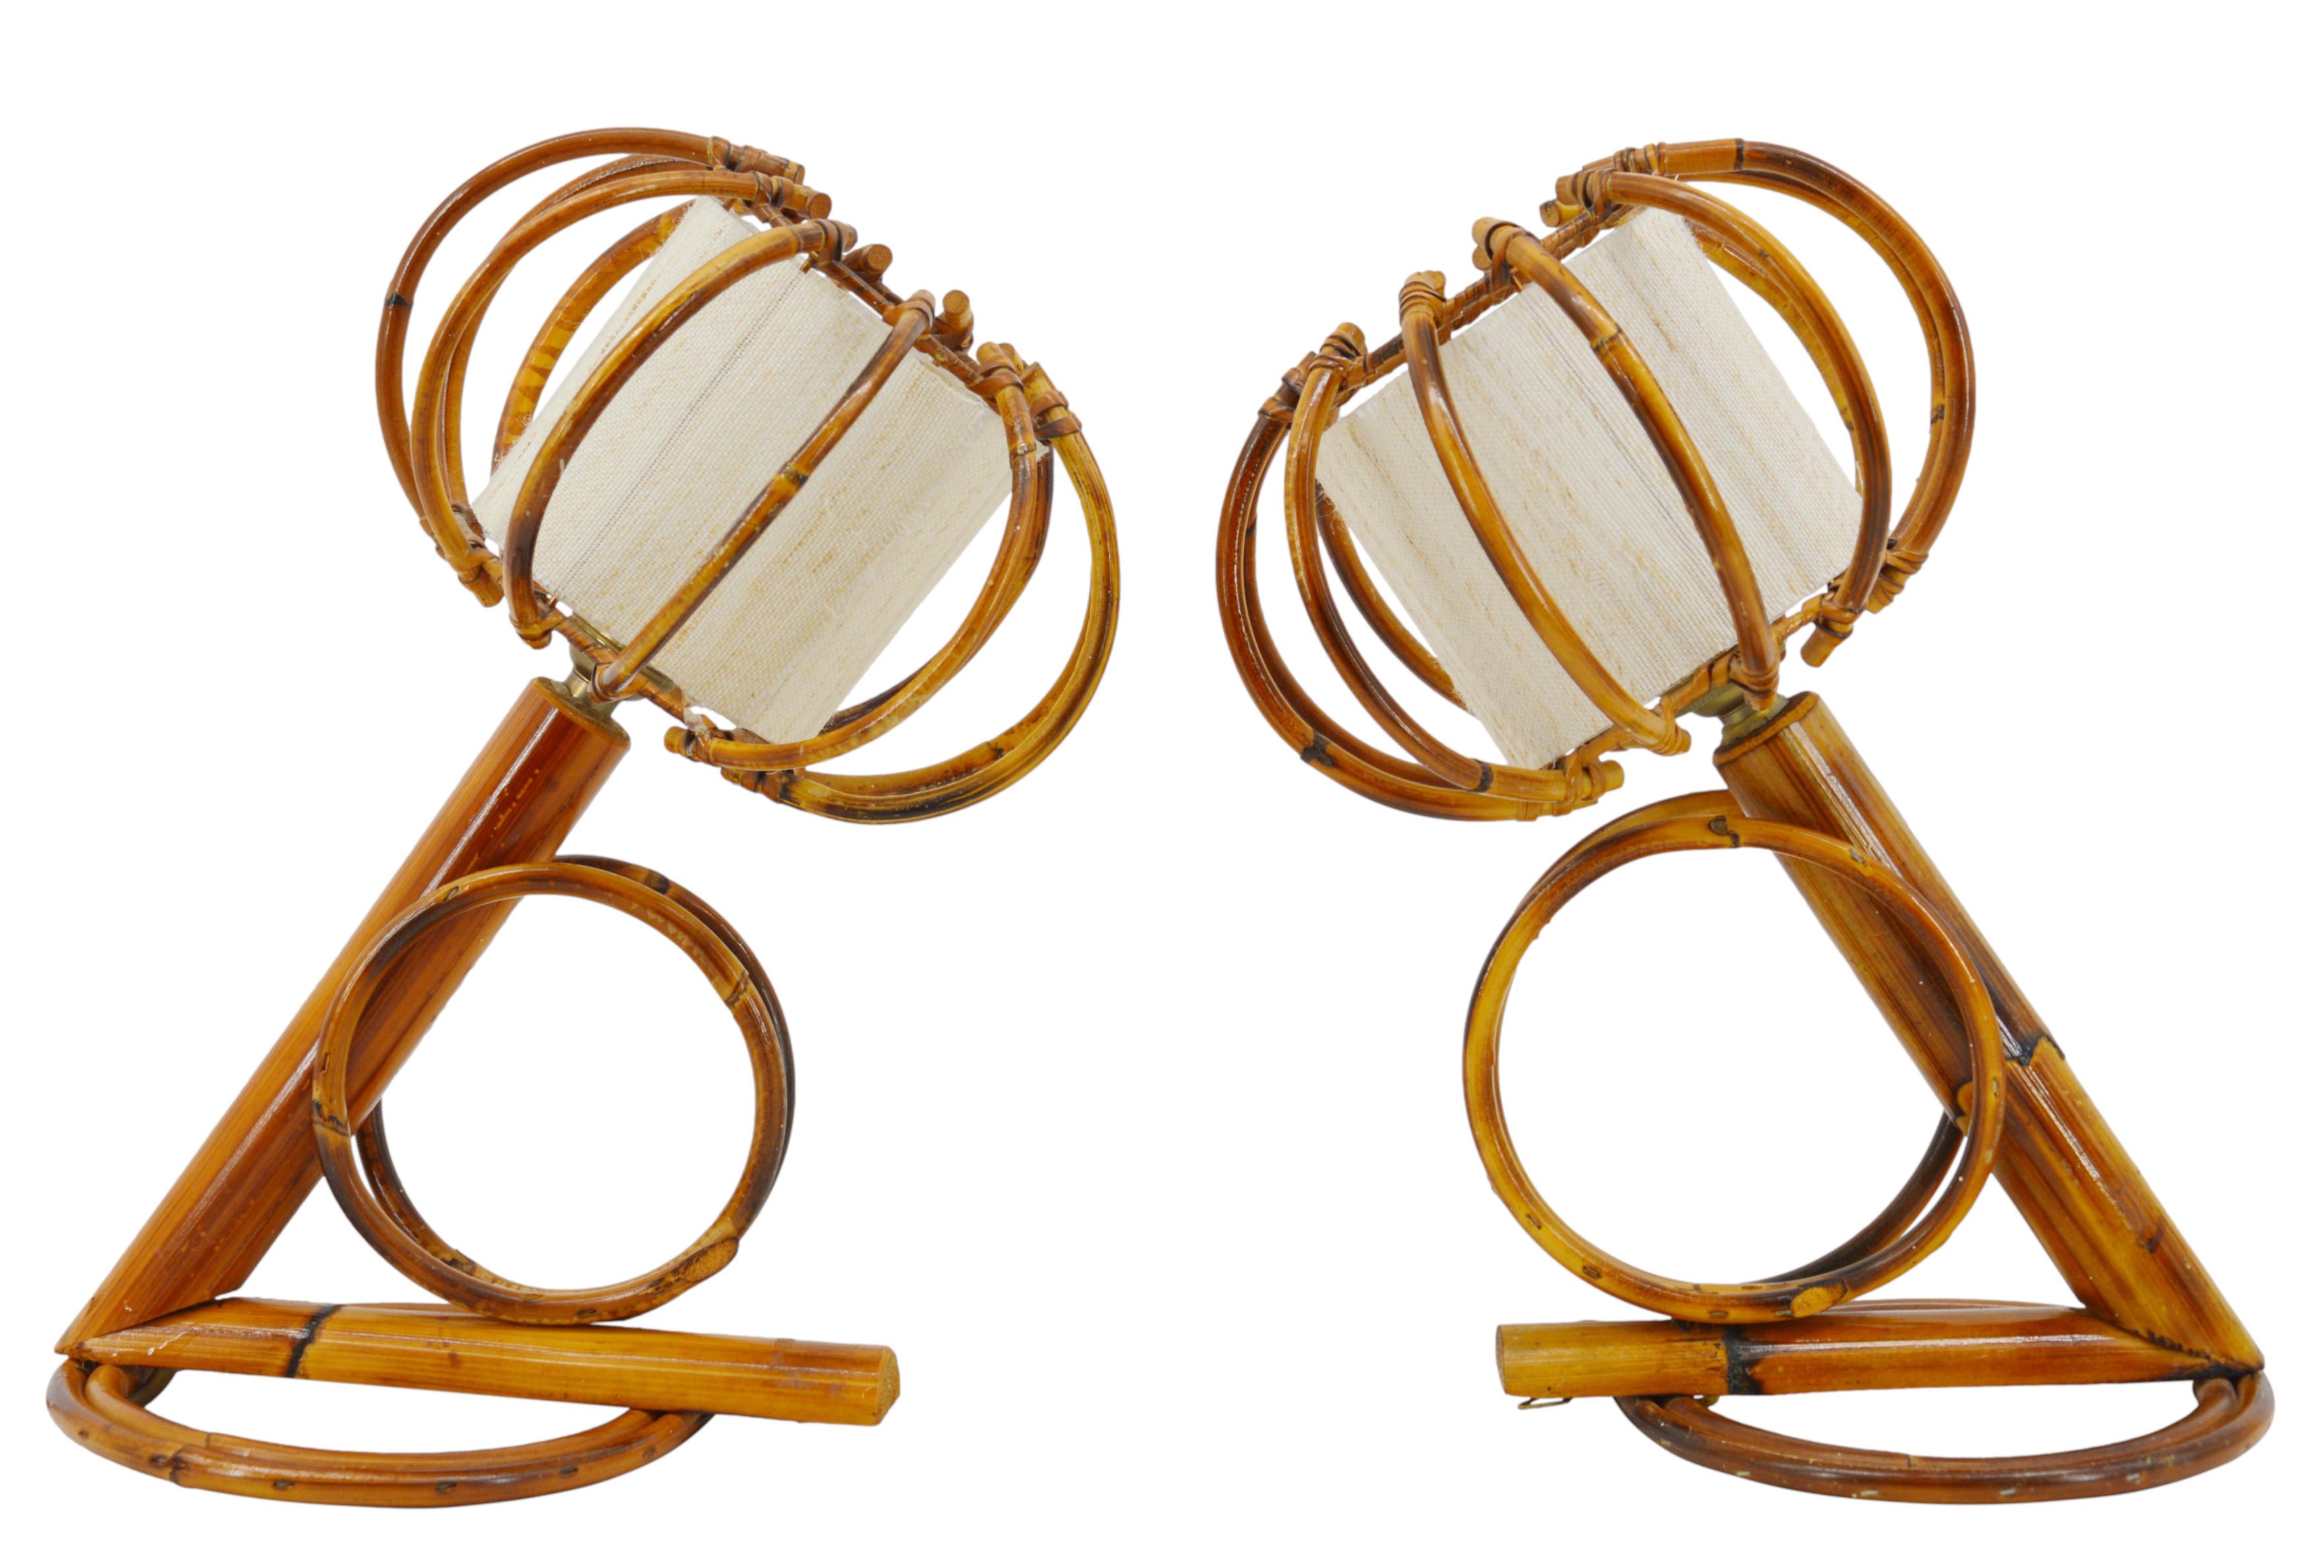 Pair of bamboo wall sconces by Louis Sognot, France, 1950s. Bamboo, rattan and fabric. Original fabric shades. A wonderful example of mid-century craftsmanship, where bamboo and rattan are perfectly blended. Measures: Height: 9.8